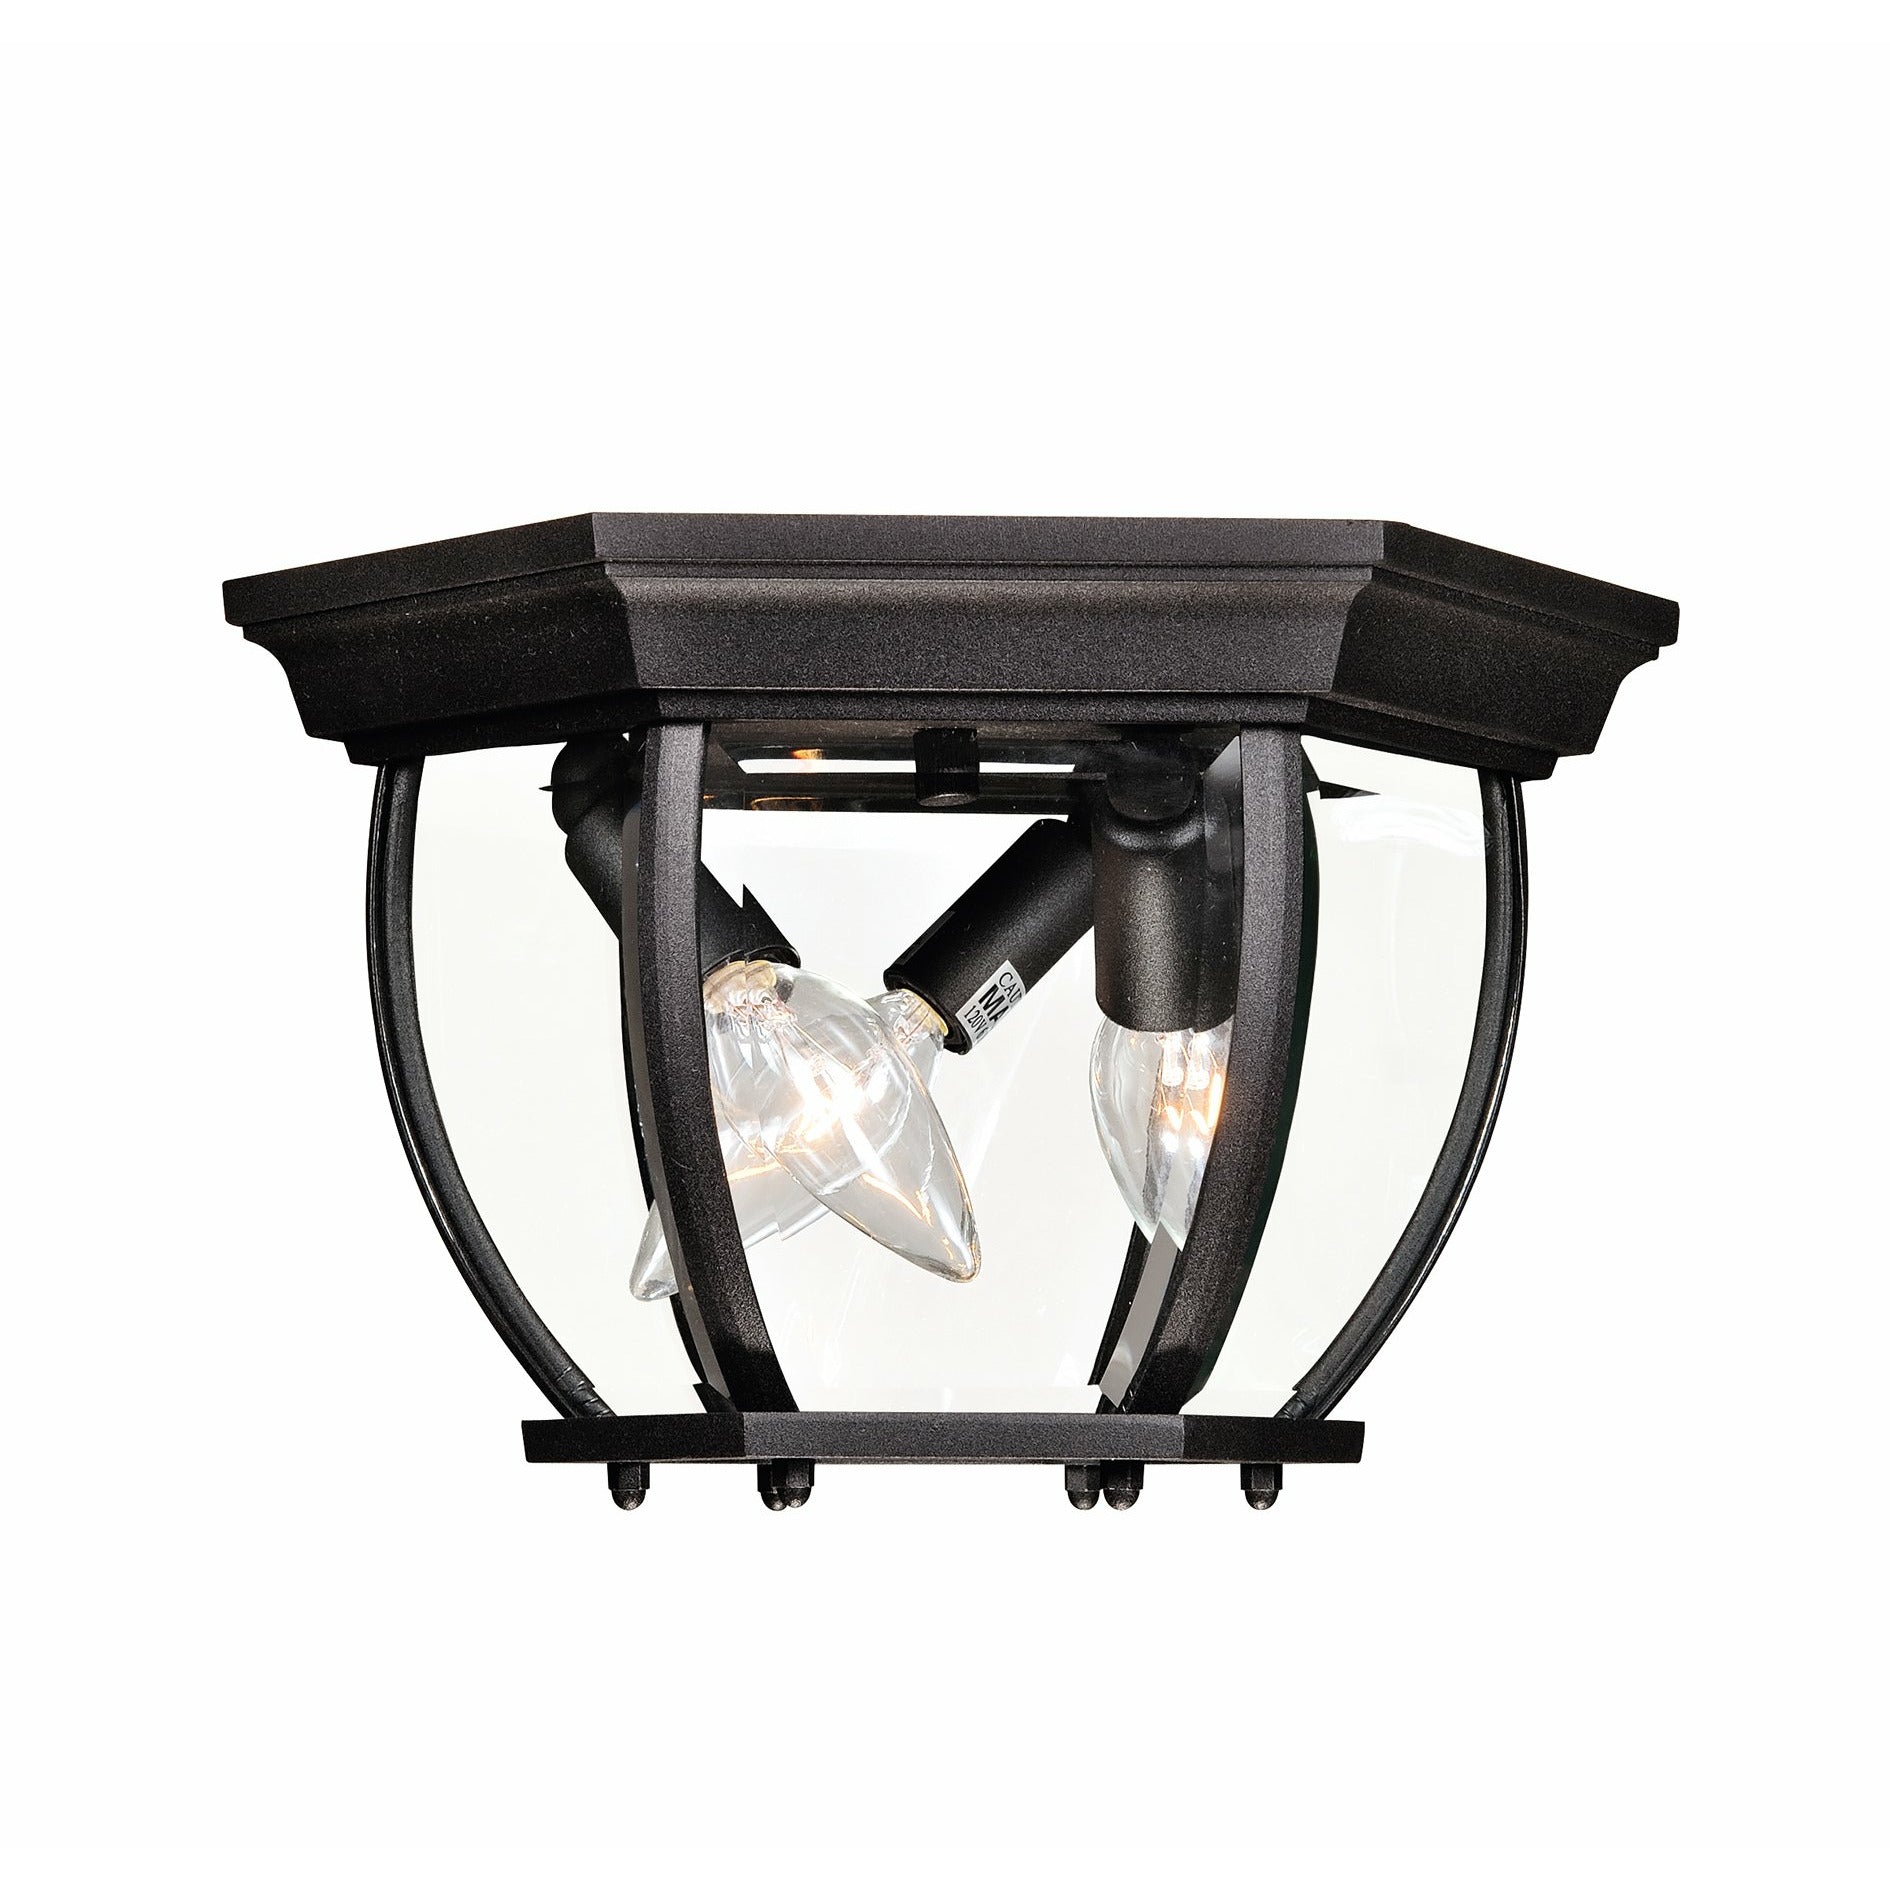 Exterior Collections Outdoor Ceiling Light Black